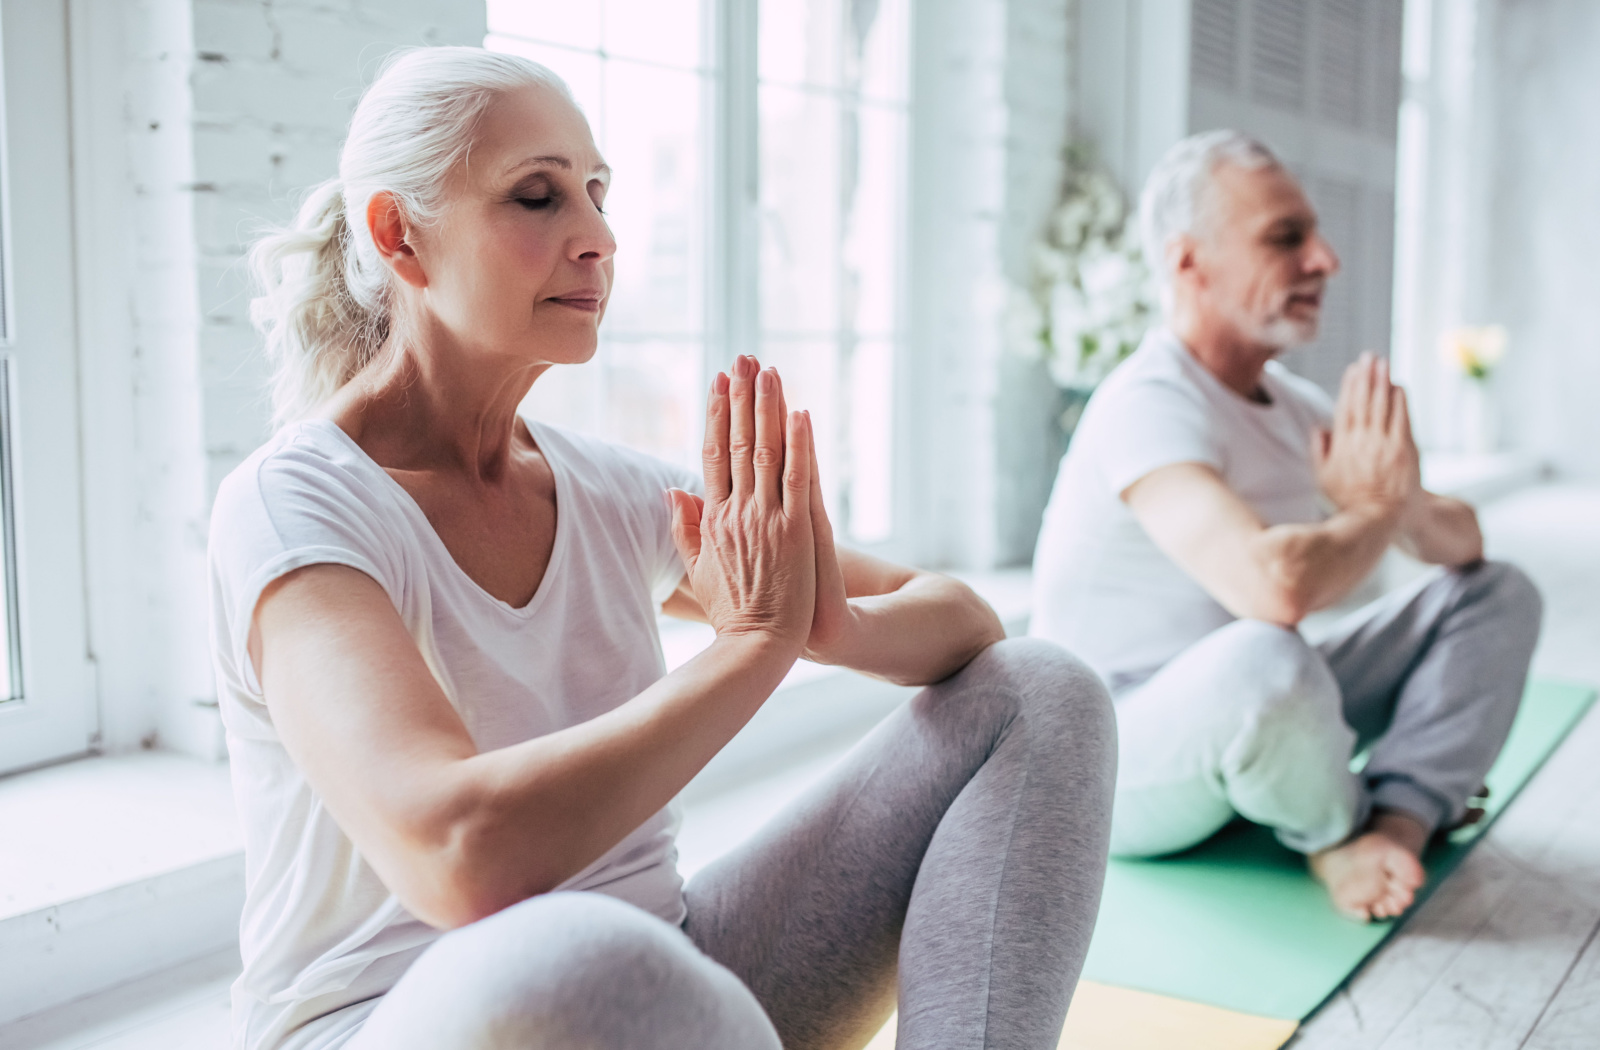 An older adult woman and an older adult man with closed eyes practicing yoga and sitting on yoga mats